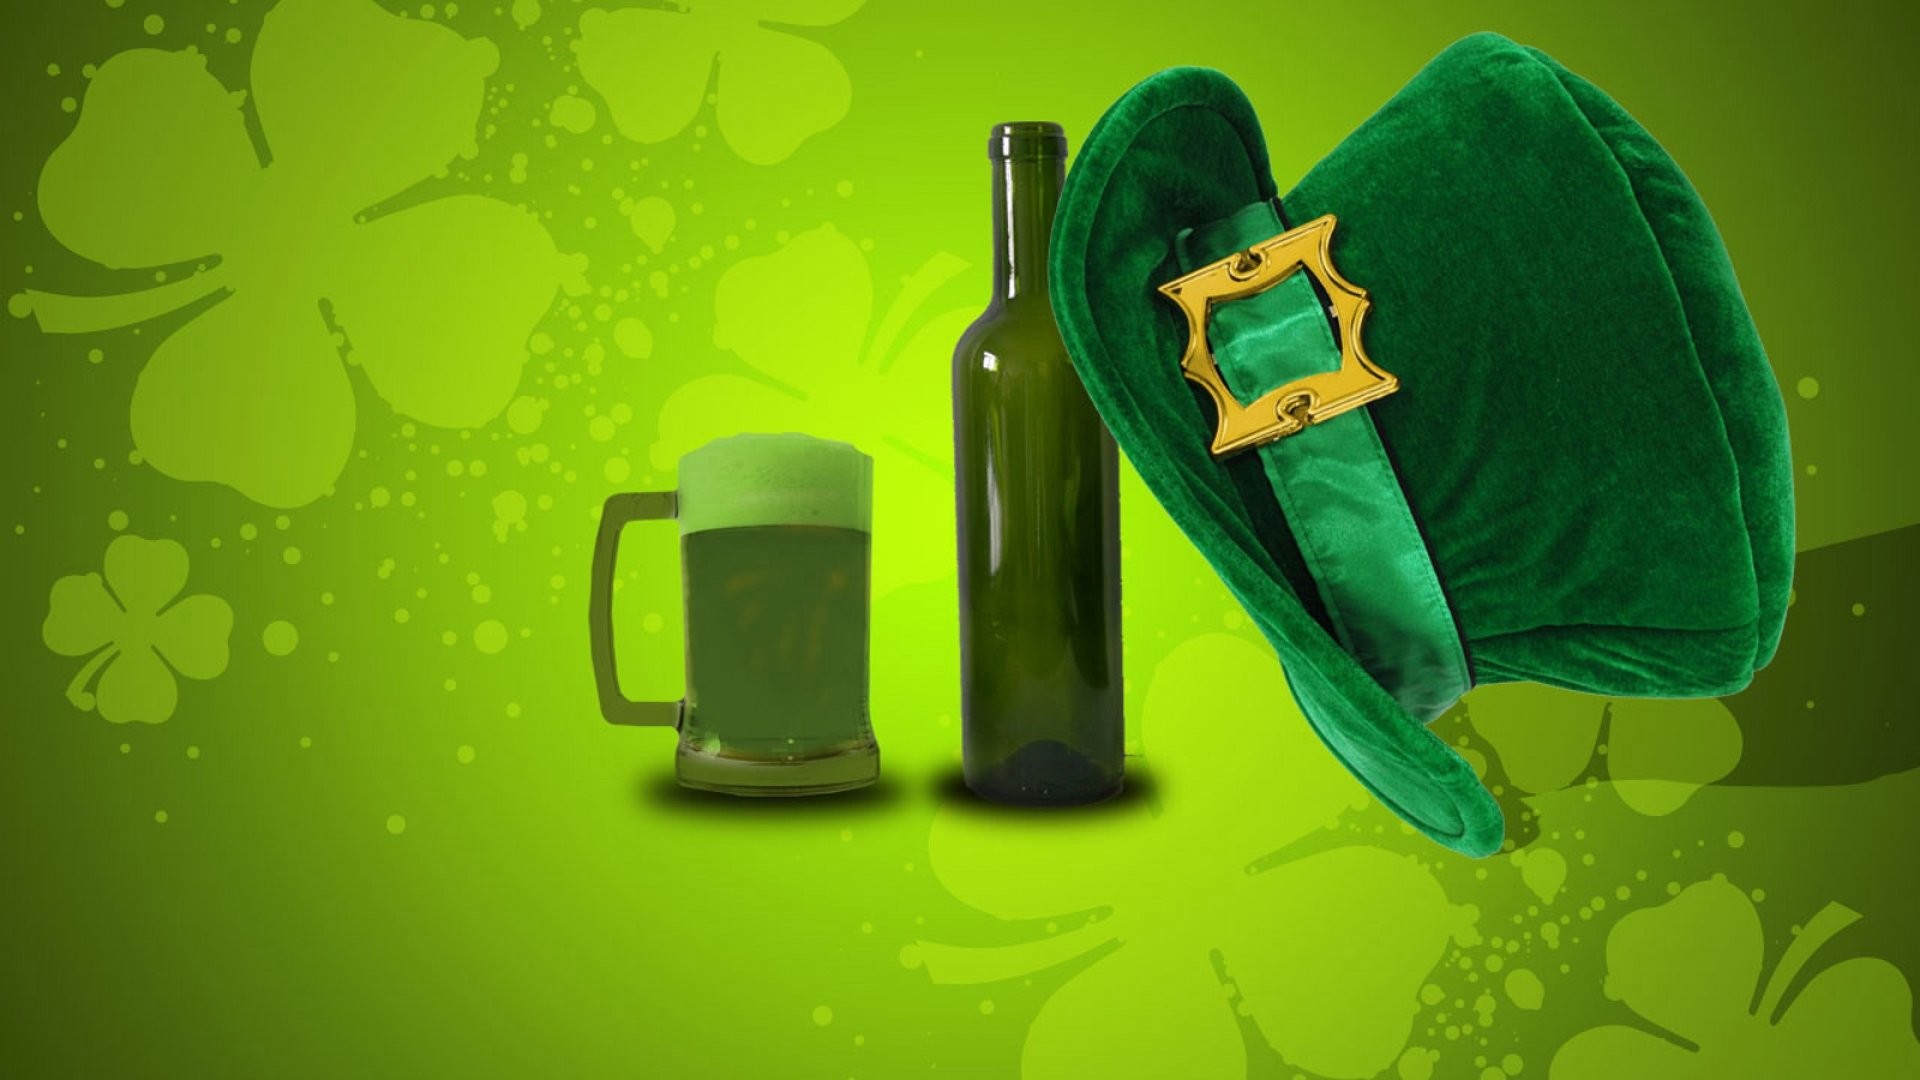 1920x1080 st patrick's day green hat and green beer HD Wallpaper | Background Image |   | ID:684562 - Wallpaper Abyss